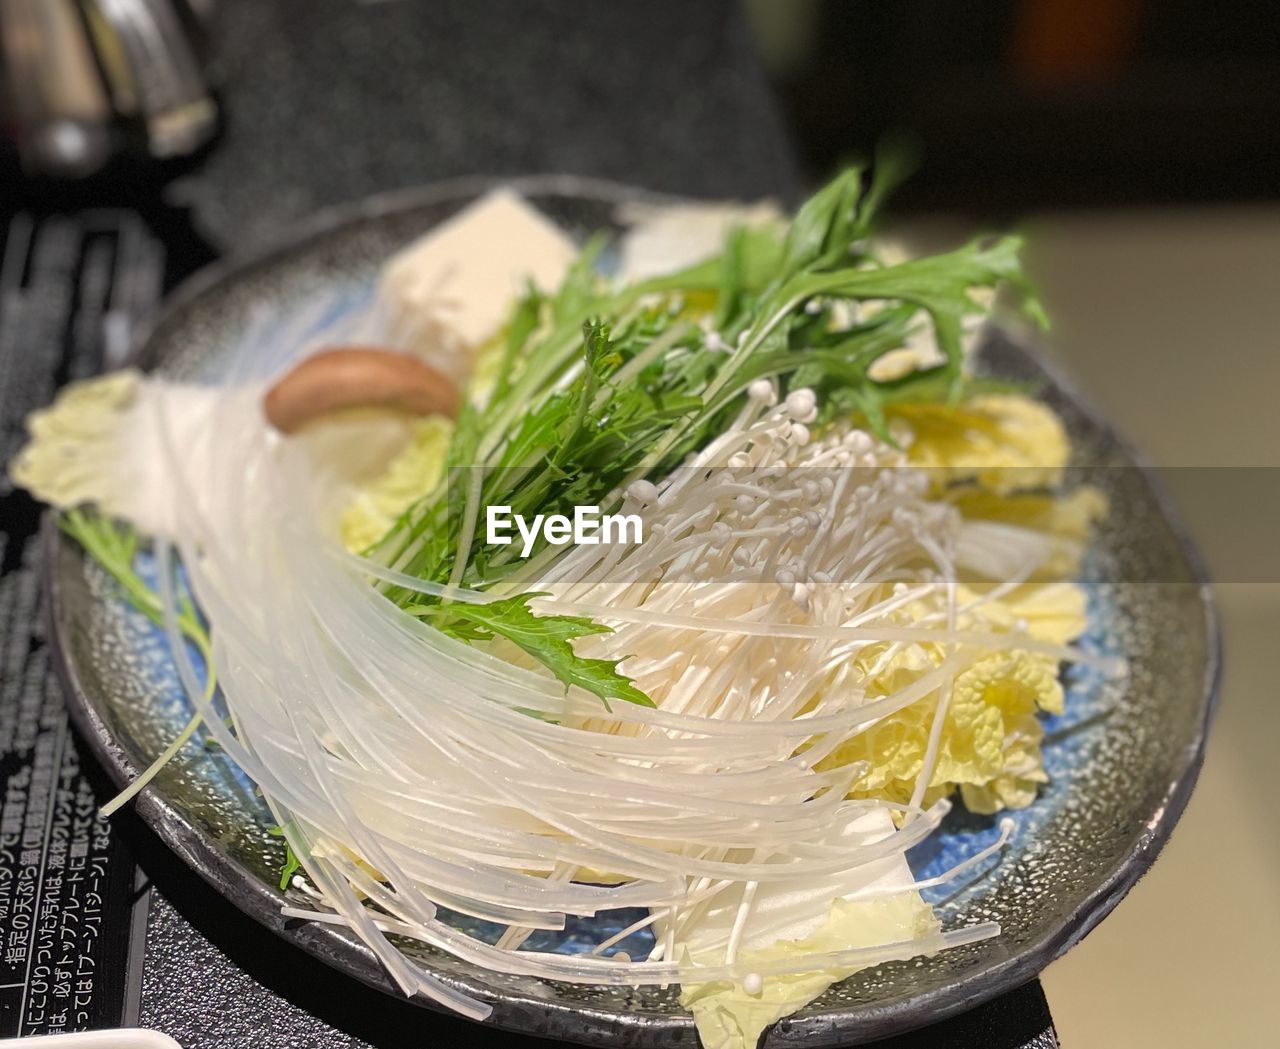 food, food and drink, healthy eating, wellbeing, freshness, dish, vegetable, cuisine, indoors, italian food, pasta, no people, herb, plate, fish, asian food, bowl, meal, japanese food, table, close-up, still life, ingredient, noodle, focus on foreground, business, seafood